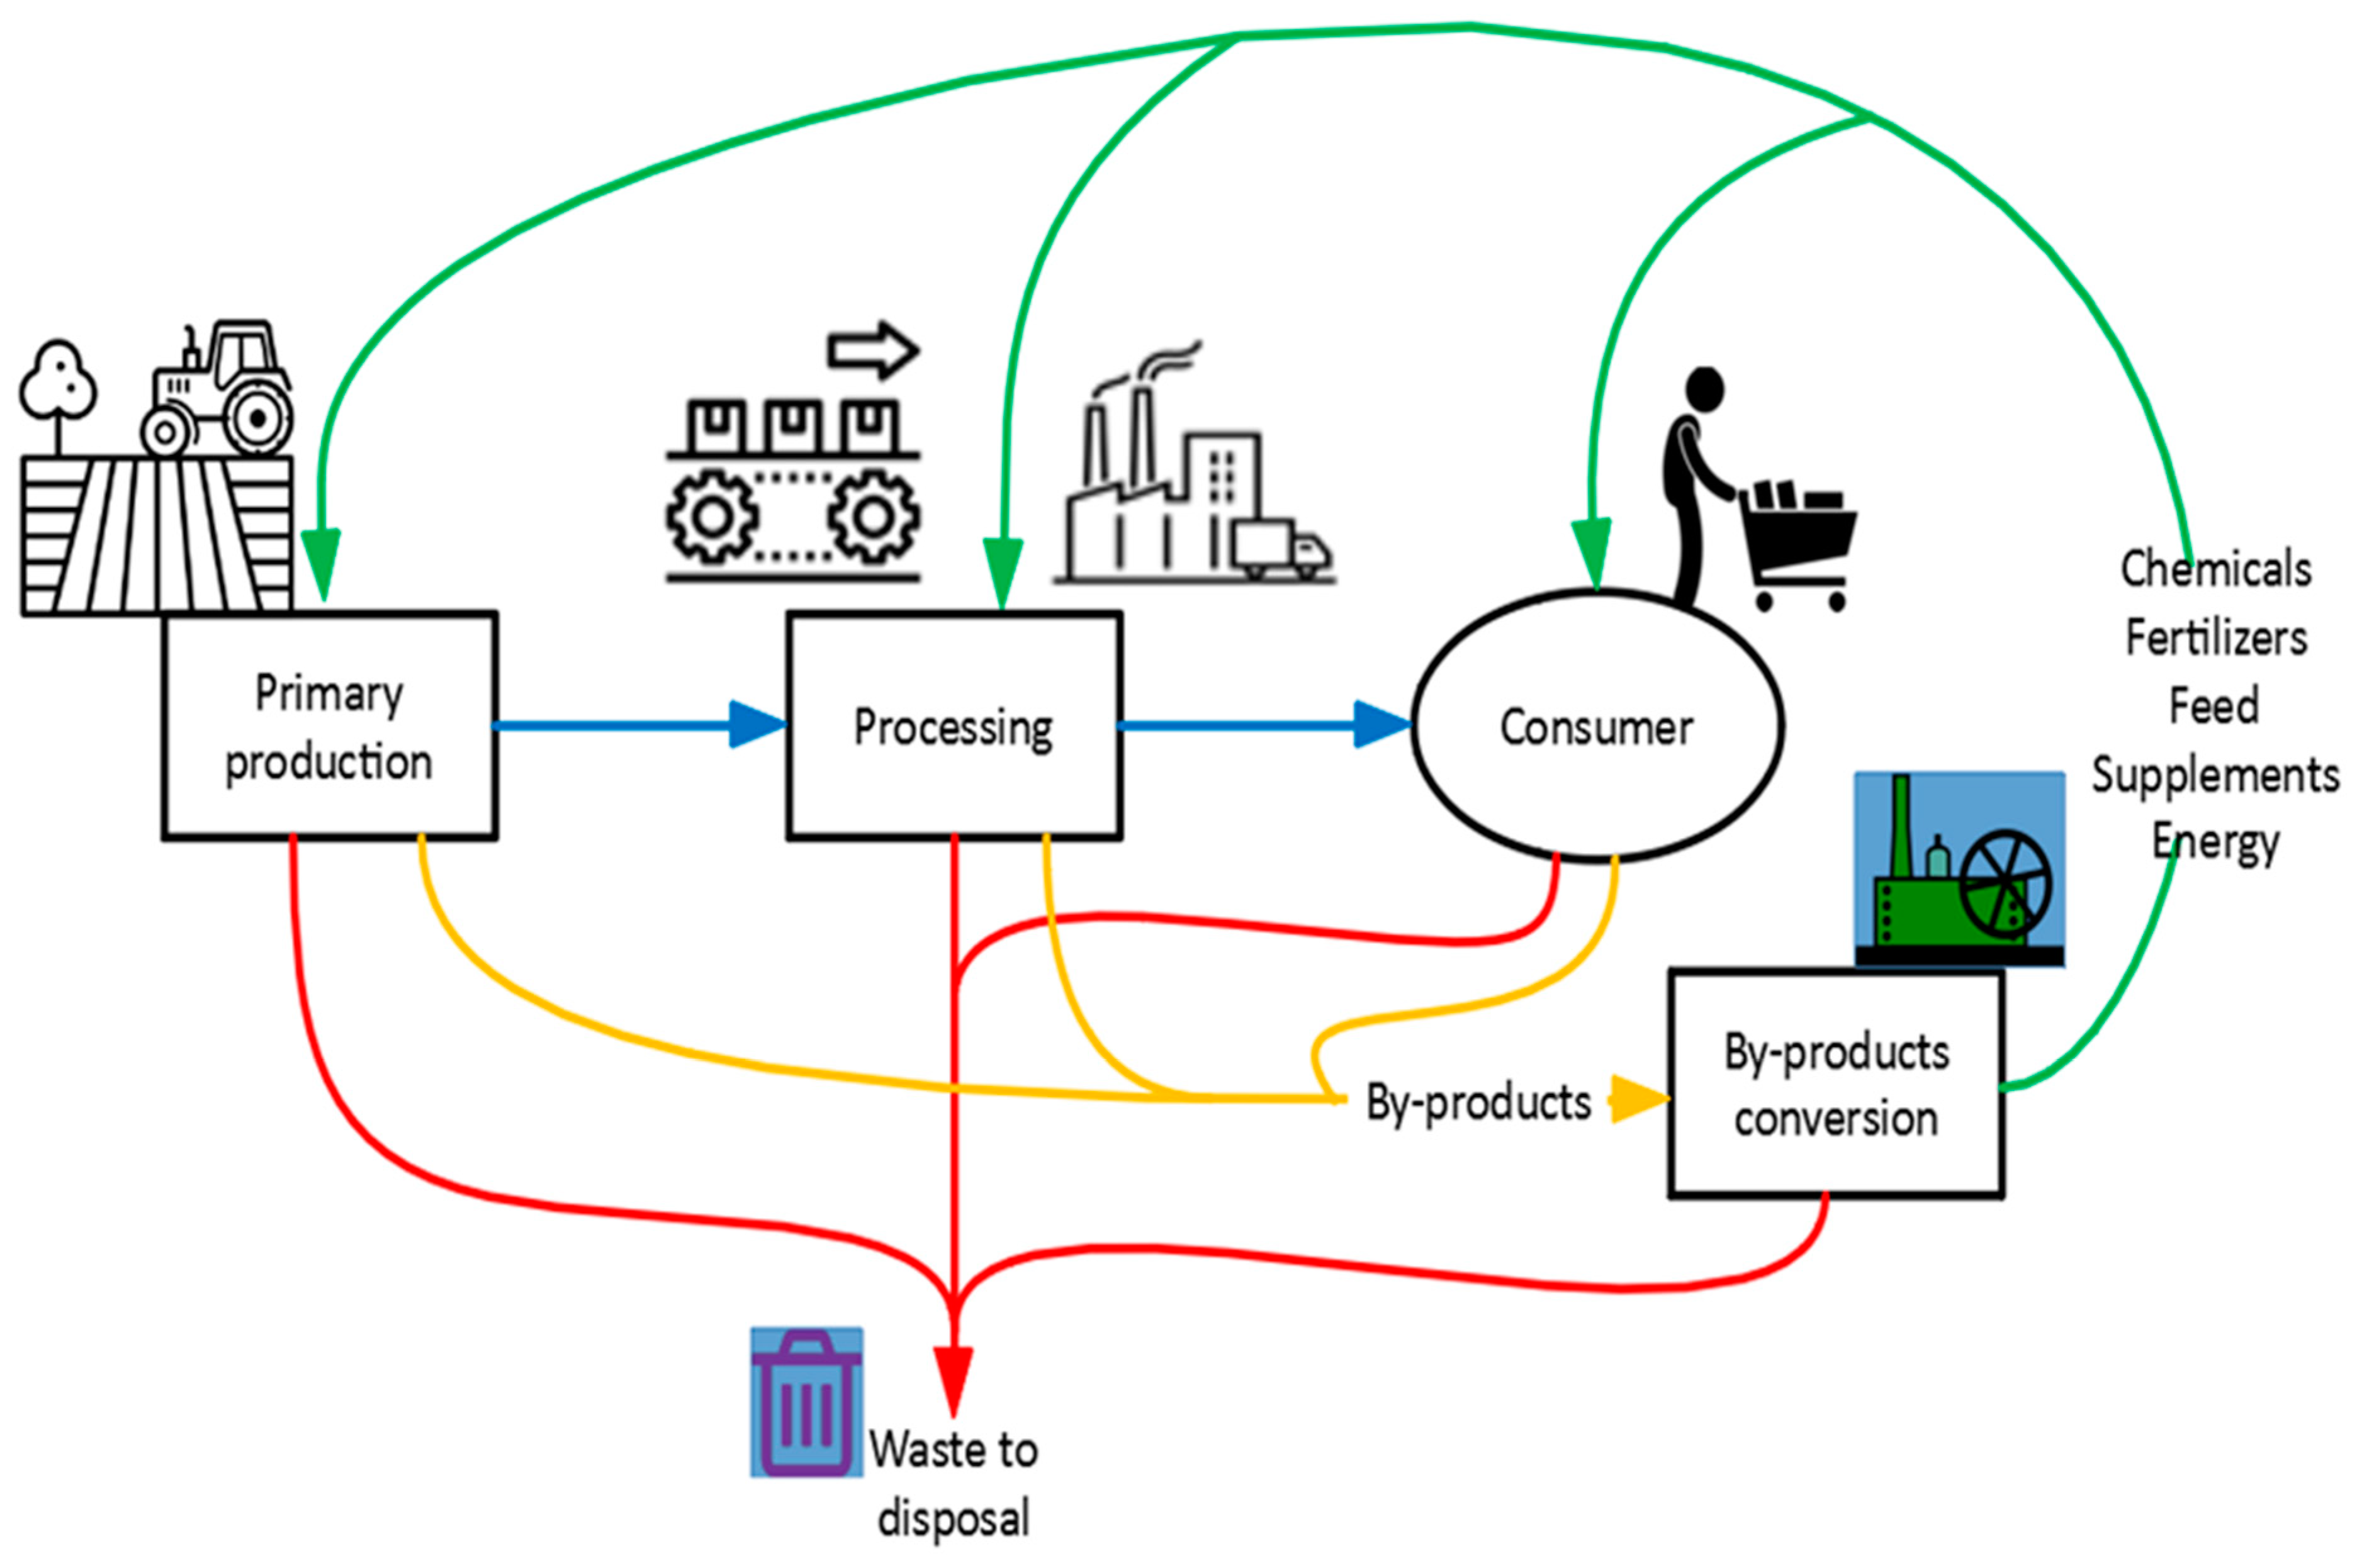 IV. Advantages of Implementing Green Energy in Circular Supply Chains and Manufacturing